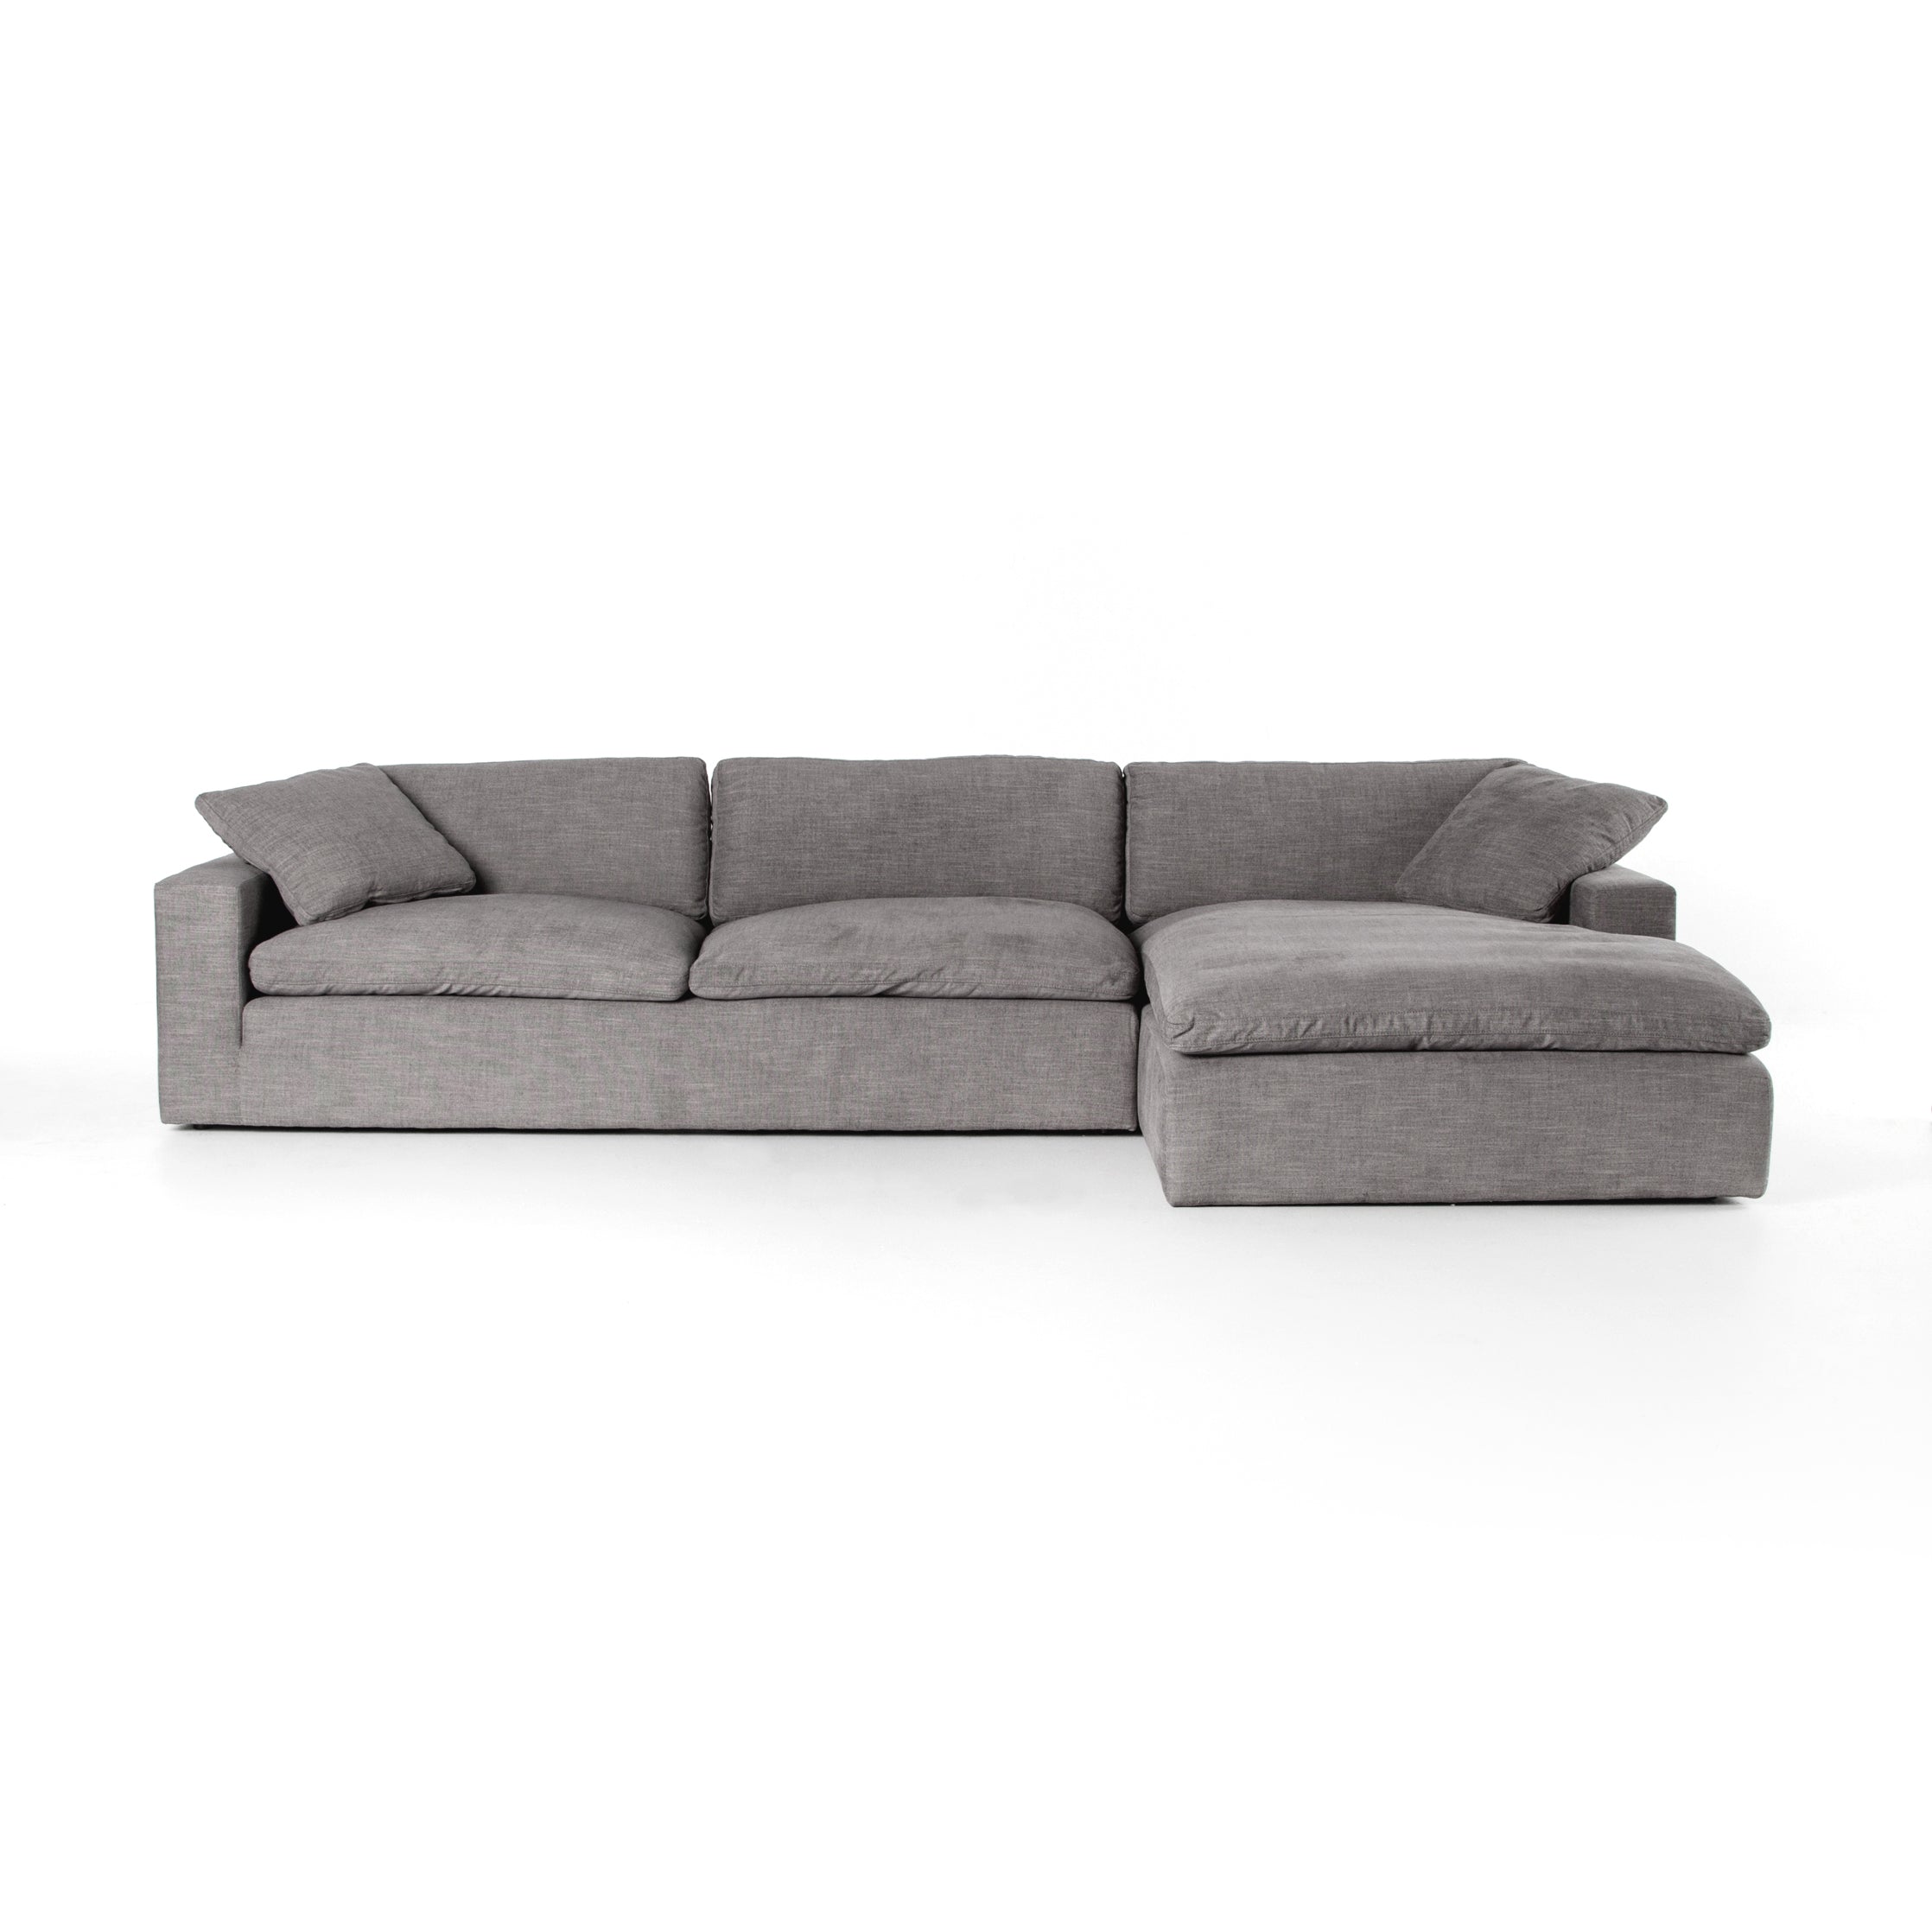 This Plume 2 Piece 136" Sectional - Harbor Grey is oversized and billowy for ultimate comfort, with block arms squaring off sink-in seating and ample feather-and-down cushioning. Perfect for movie nights and gathering the whole family around for years to come.   Overall Dimensions: 136.50"w x 70.00"d x 33.50"h